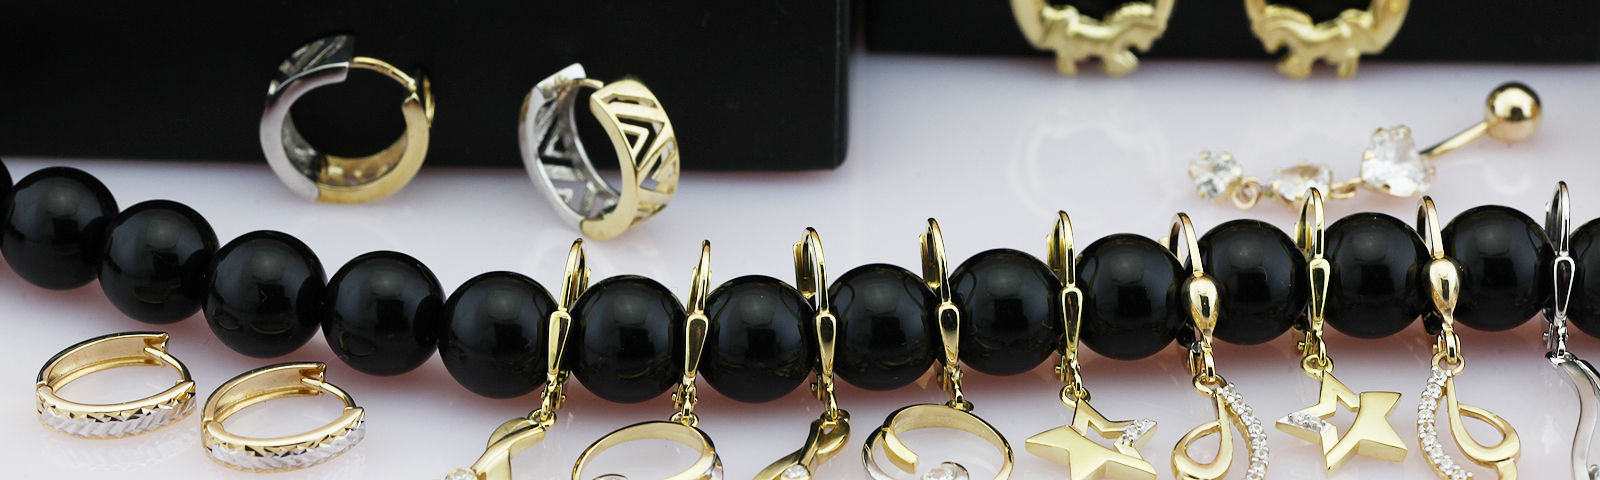 Gold ear jewelry on black pearl necklace